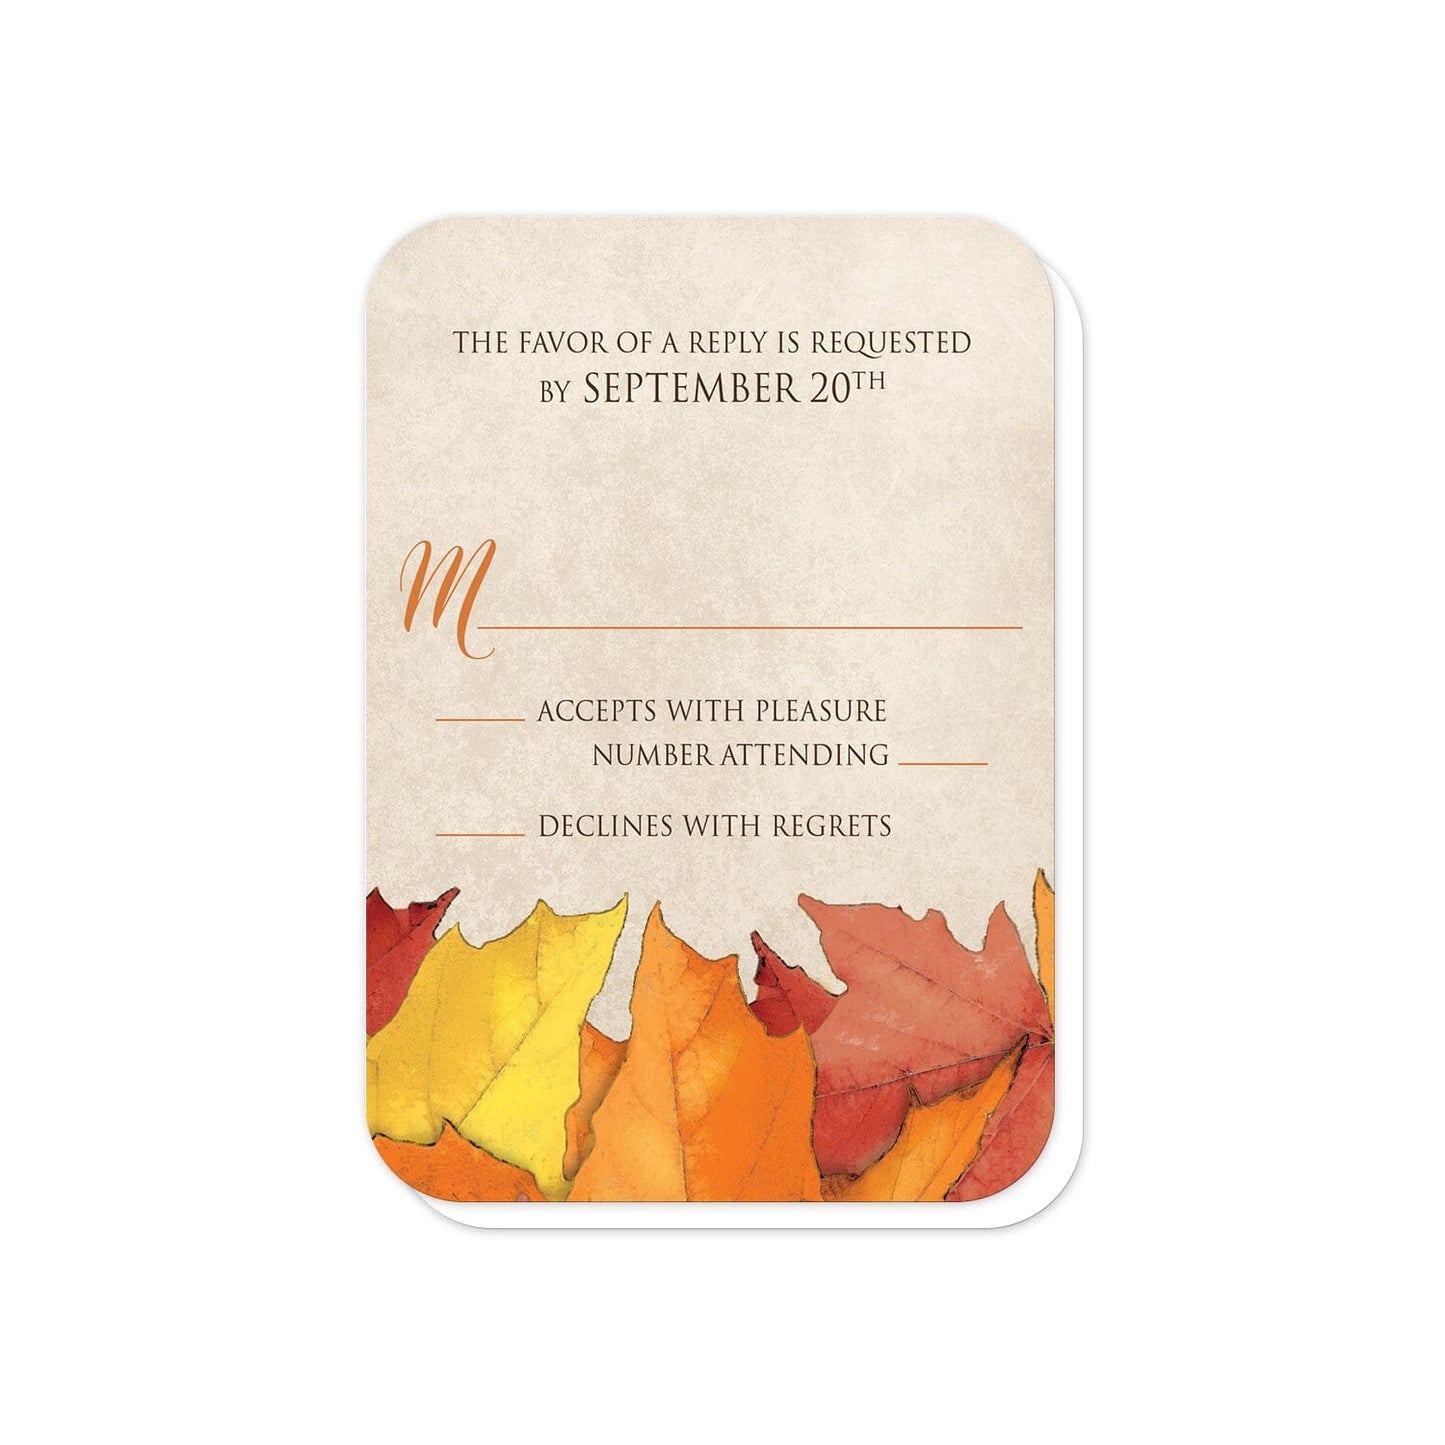 Rustic Wood and Leaves Fall RSVP Cards (with rounded corners) at Artistically Invited.